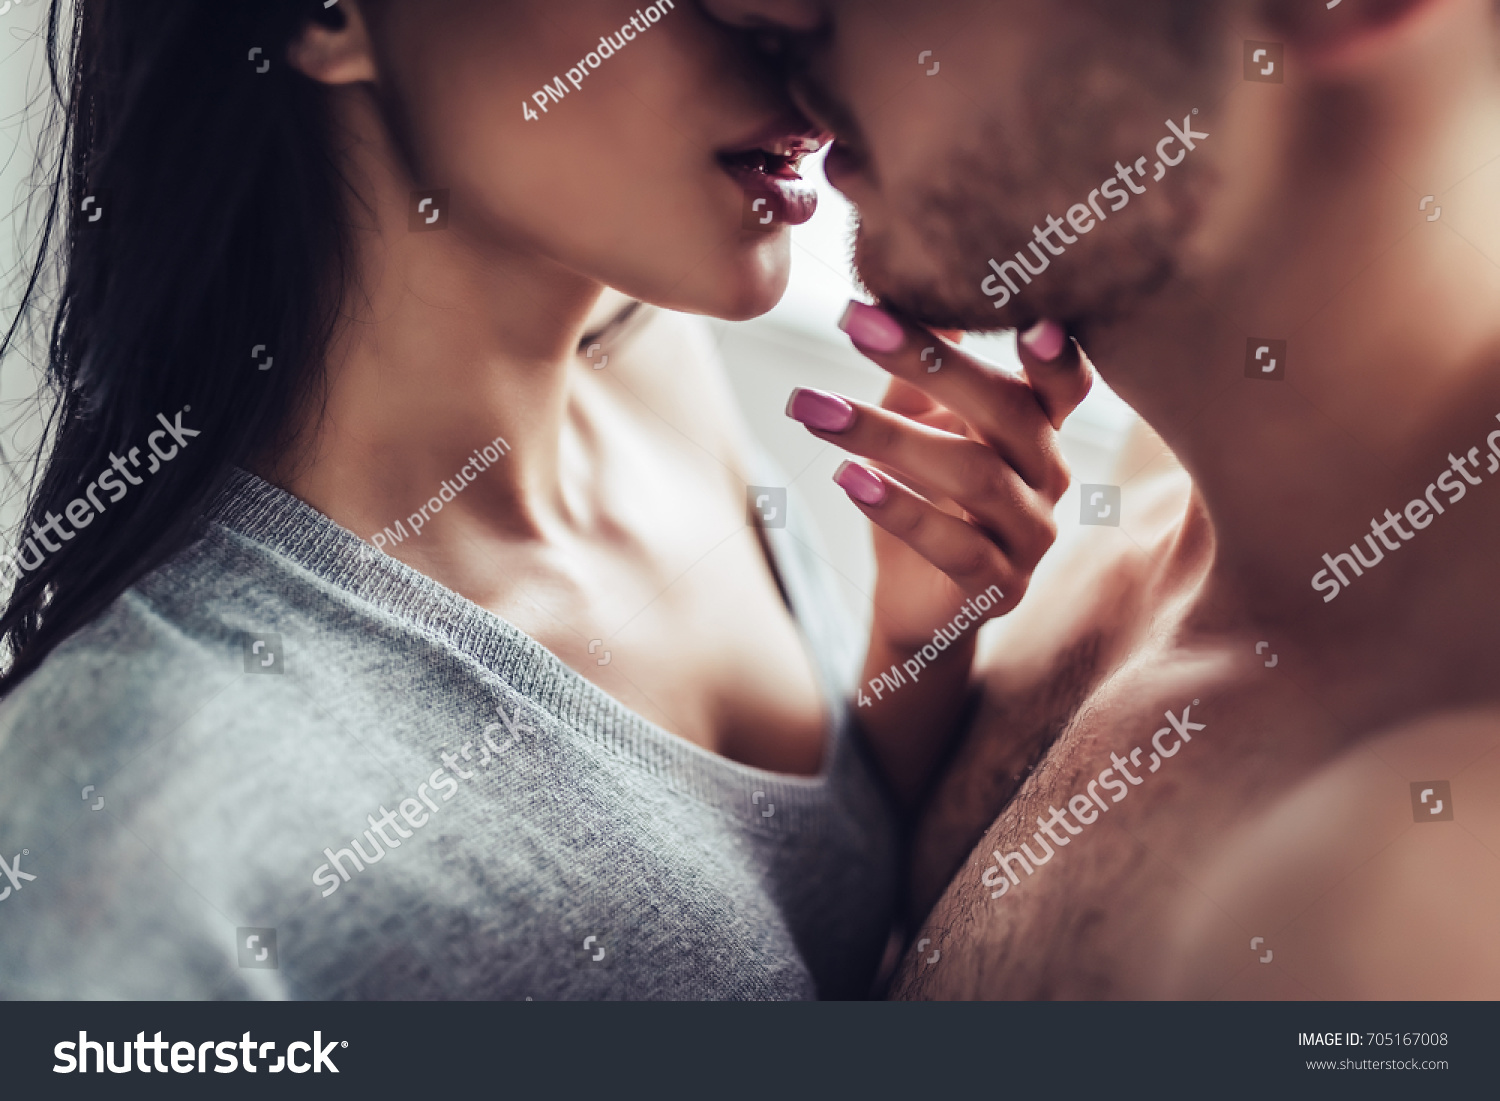 Close-up of young romantic couple is kissing and enjoying the company of each other at home. #705167008